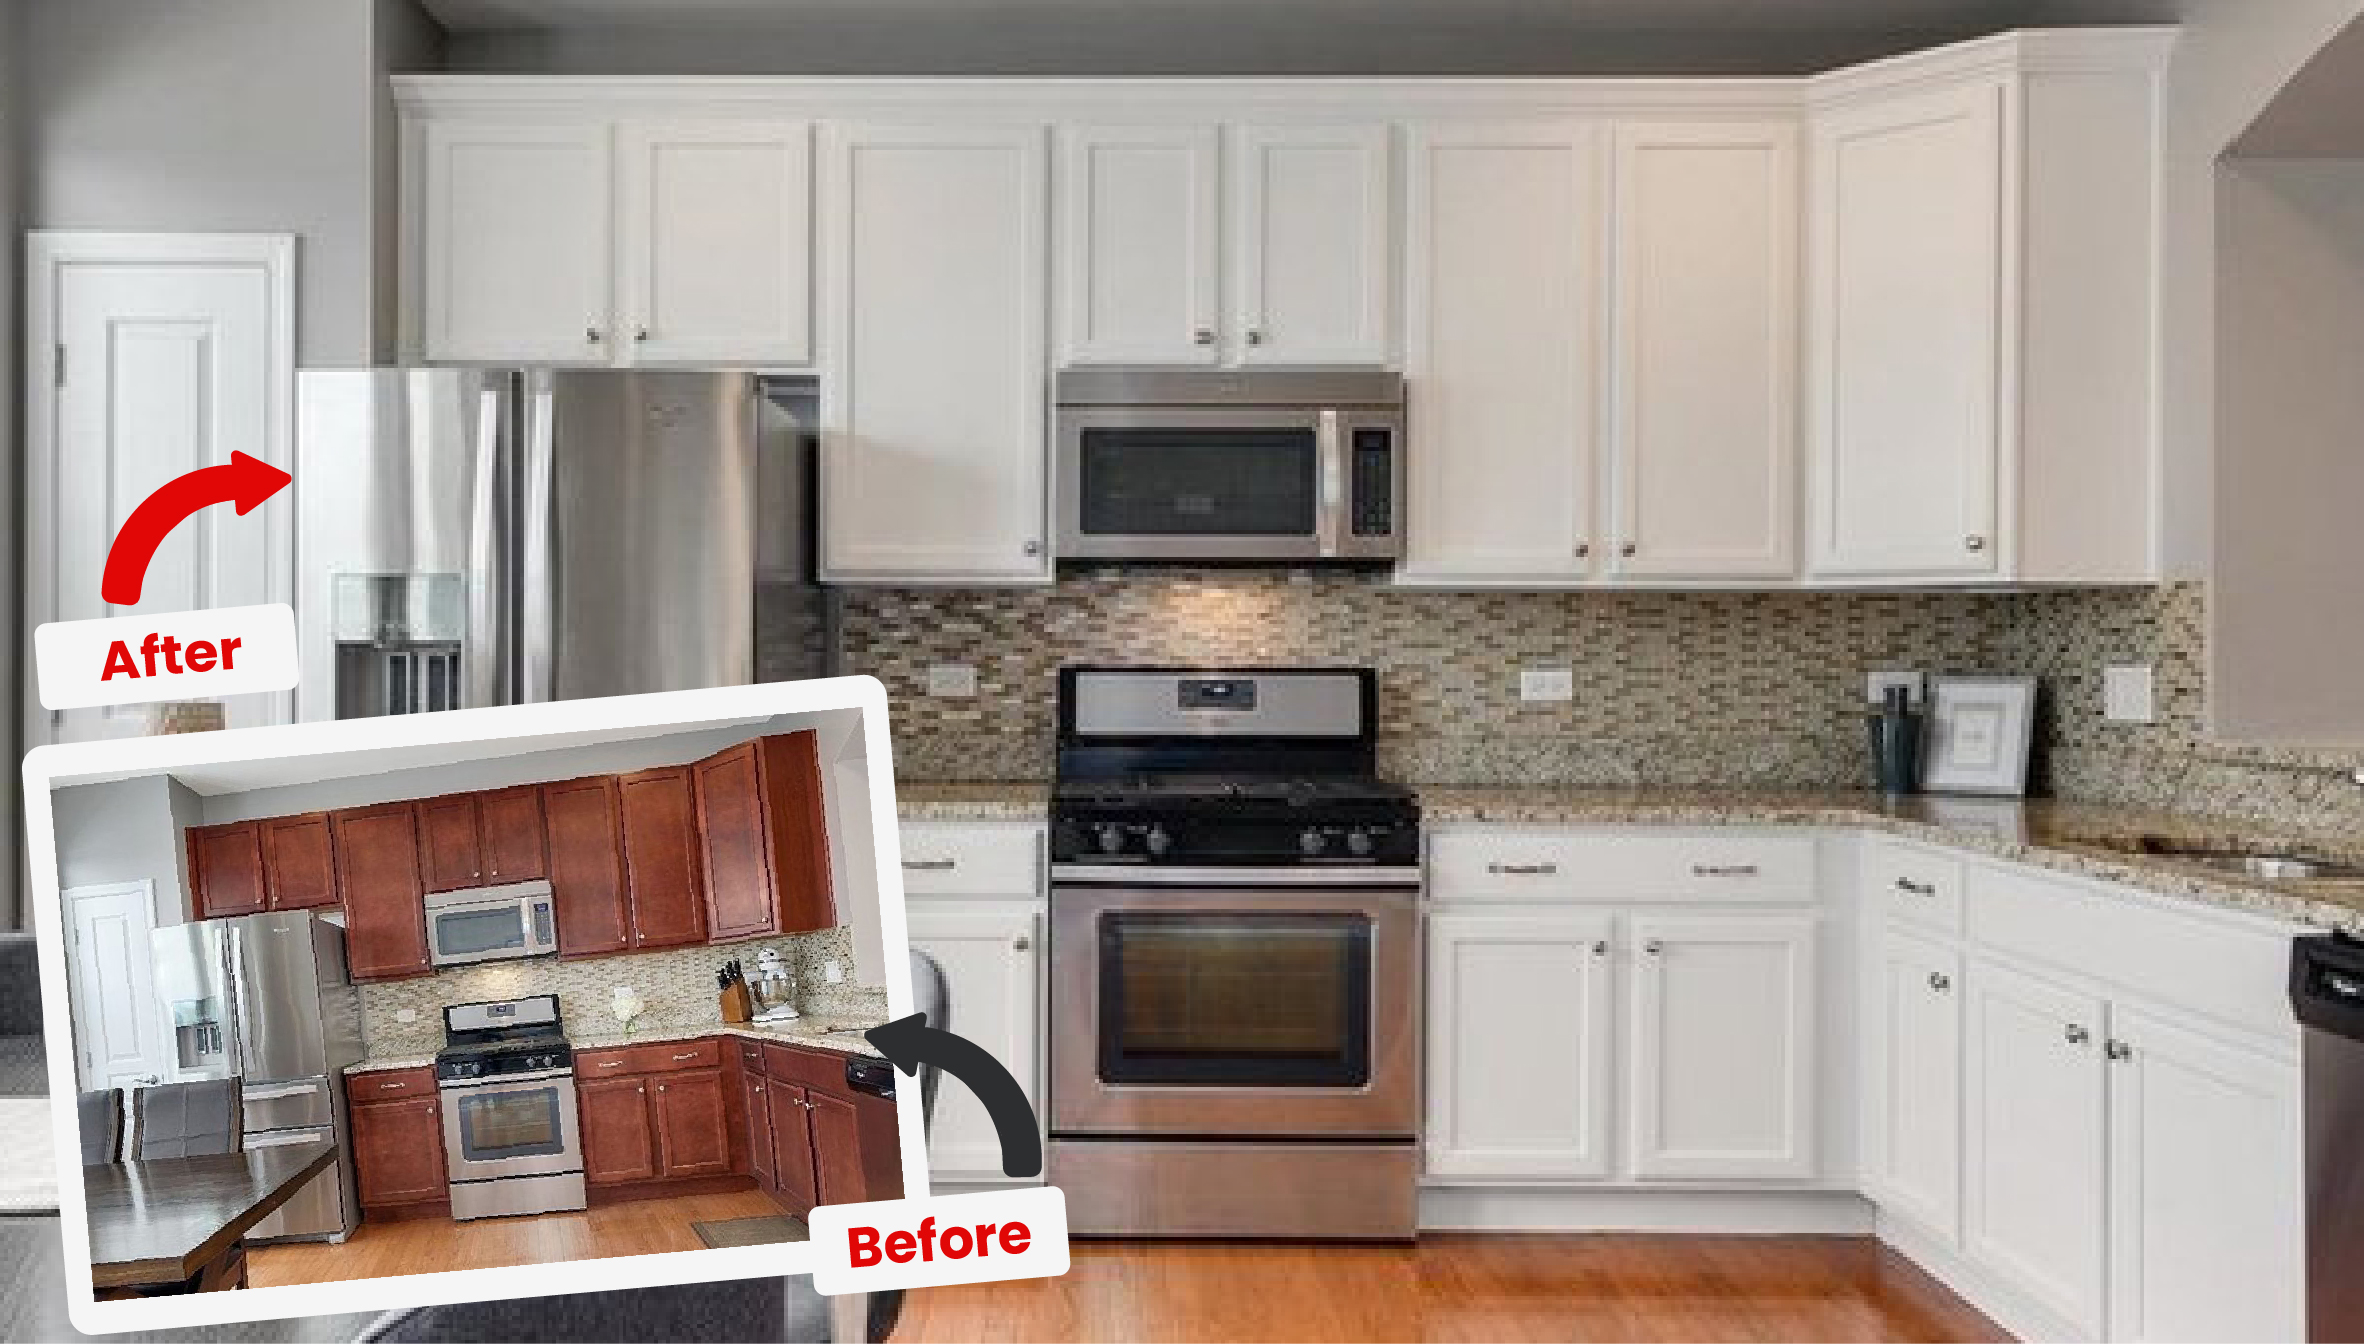 https://yelparticles.wpengine.com/wp-content/uploads/2022/02/kitchen-cabinet-refinishing-before-after.jpg